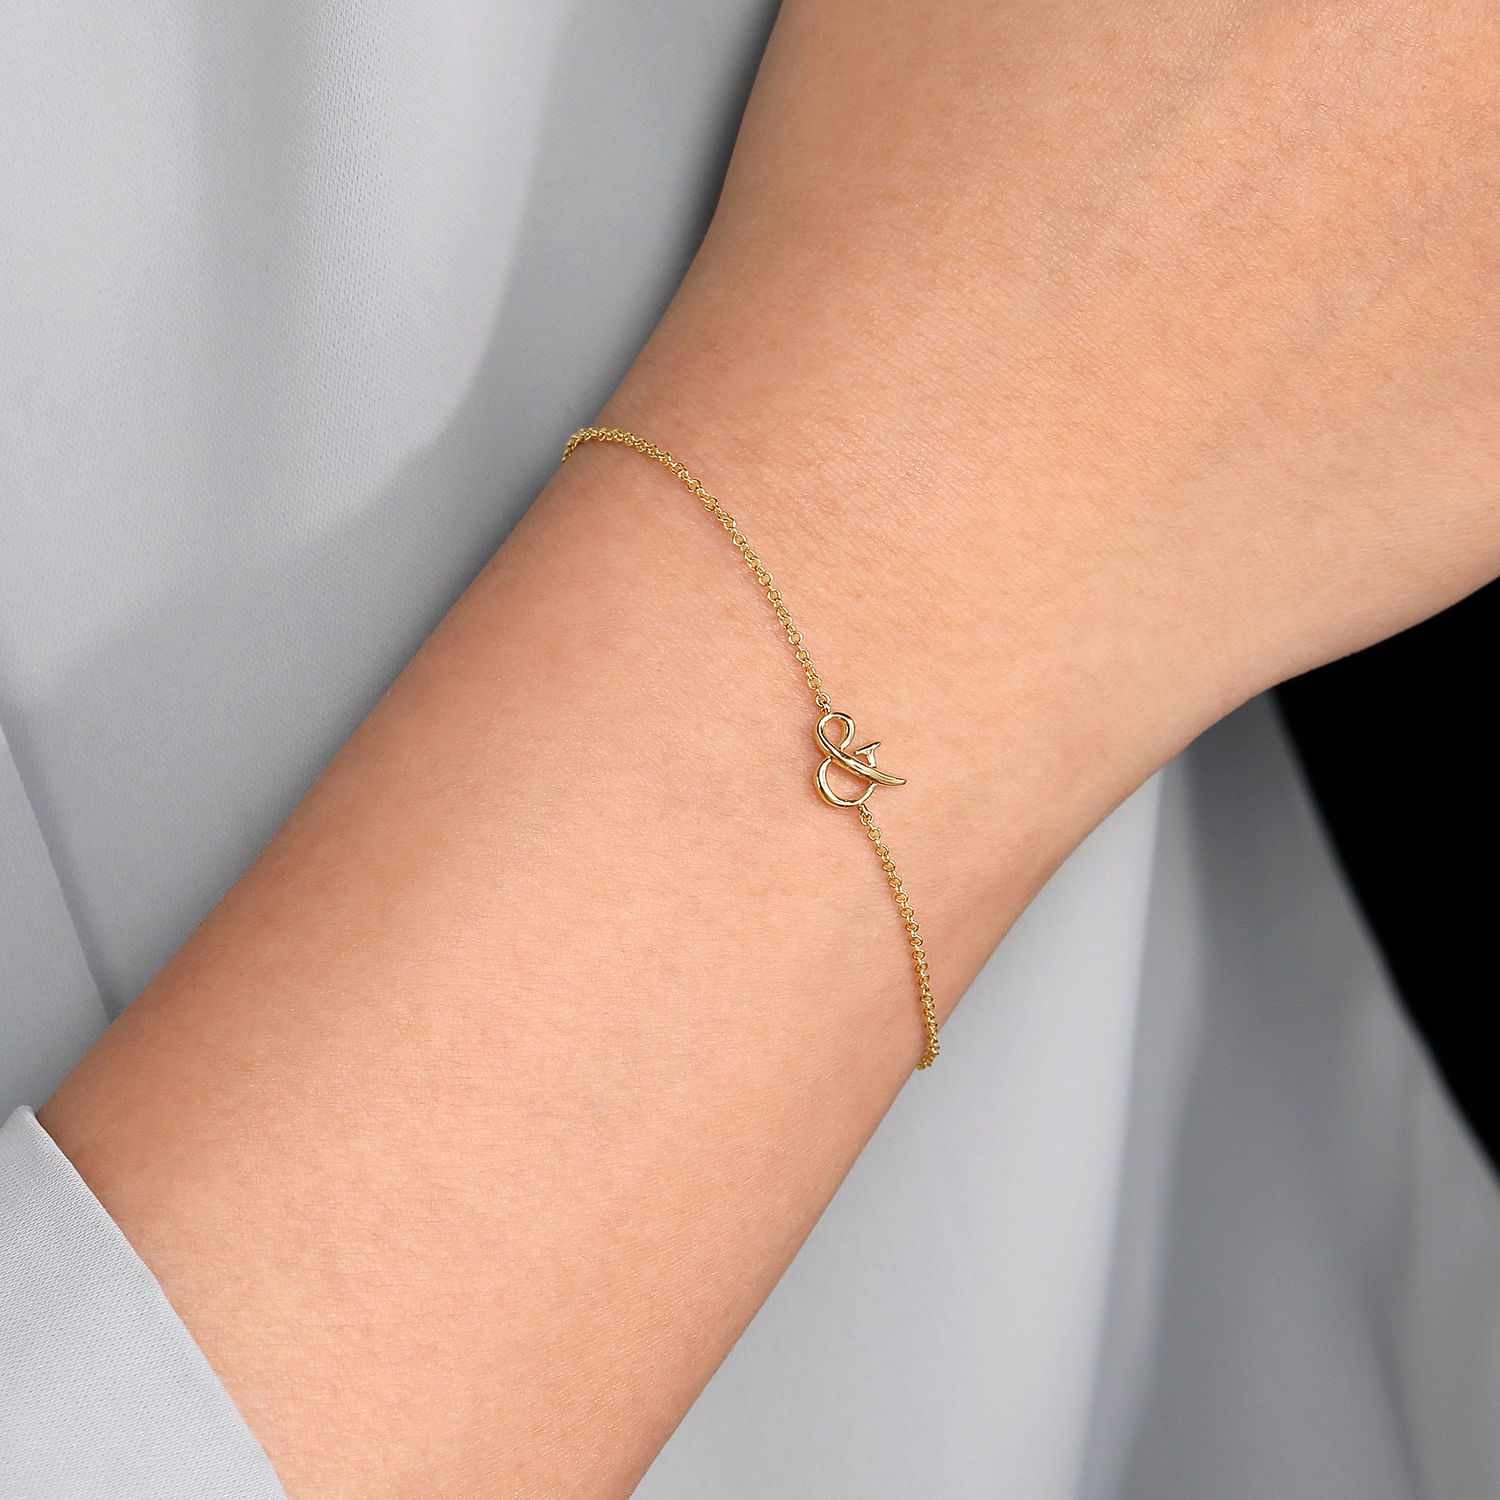 14K Yellow Gold Chain Bracelet with & Symbol